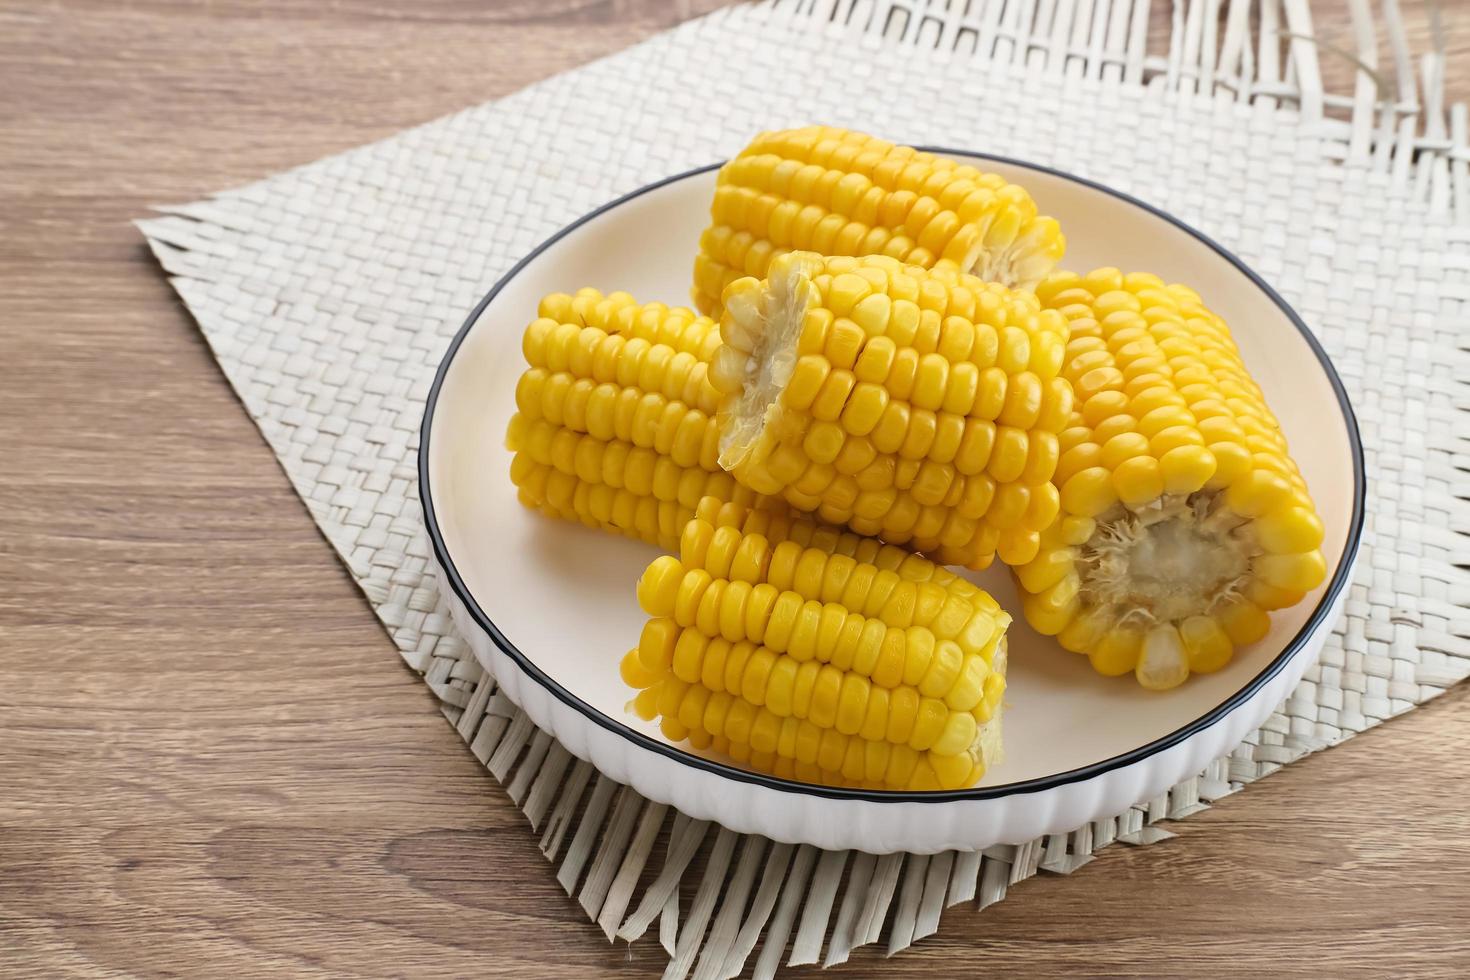 Jagung manis rebus or boiled sweet corn slices served on bowl on wooden background. Space for text. photo